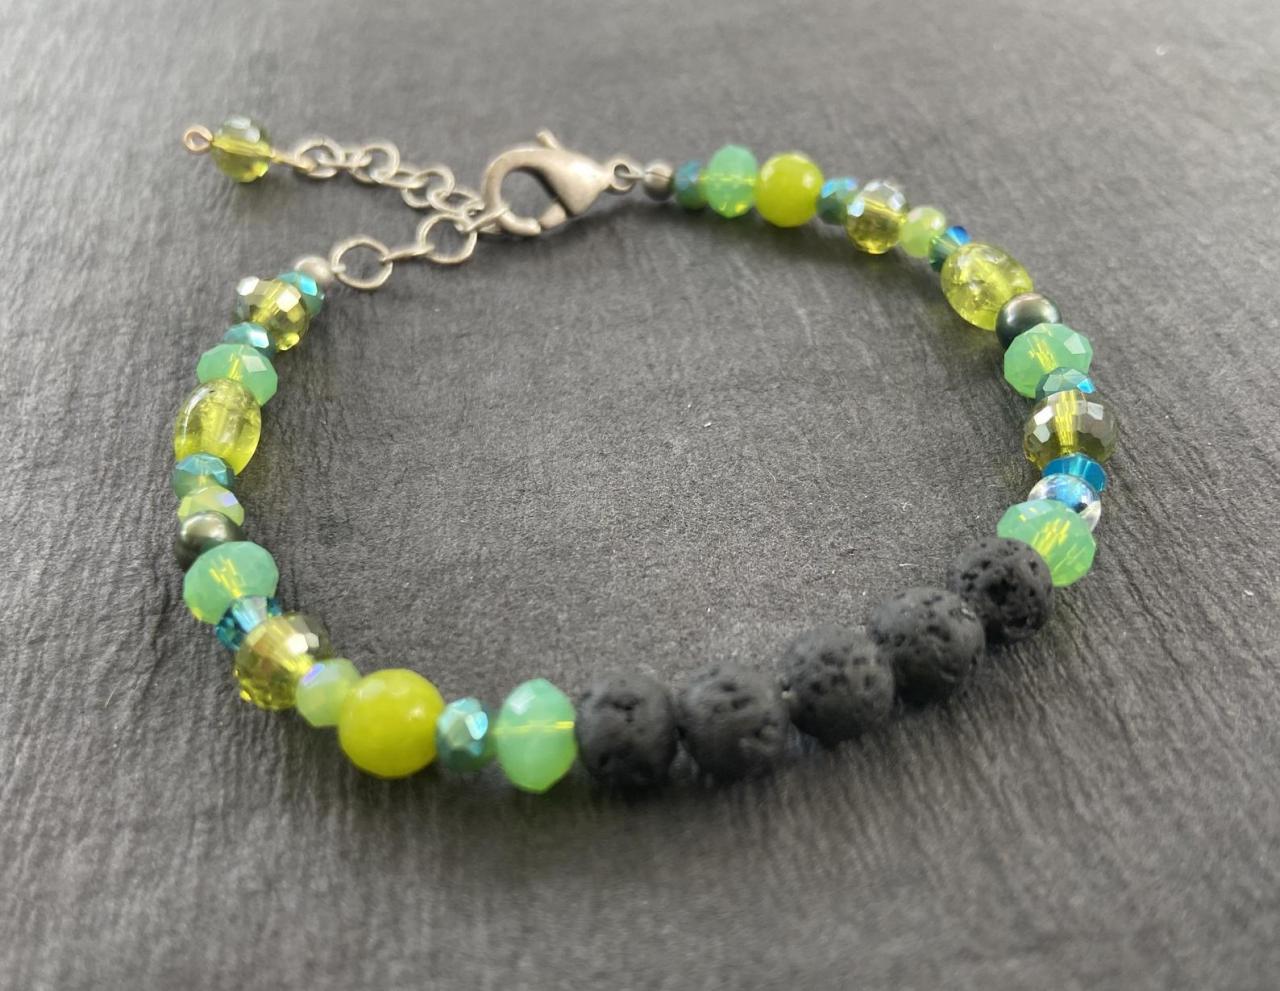 Green Aromatherapy Essential Oil Diffuser Bracelet Gemstone Healing Lava Stone Teal Lime Mix